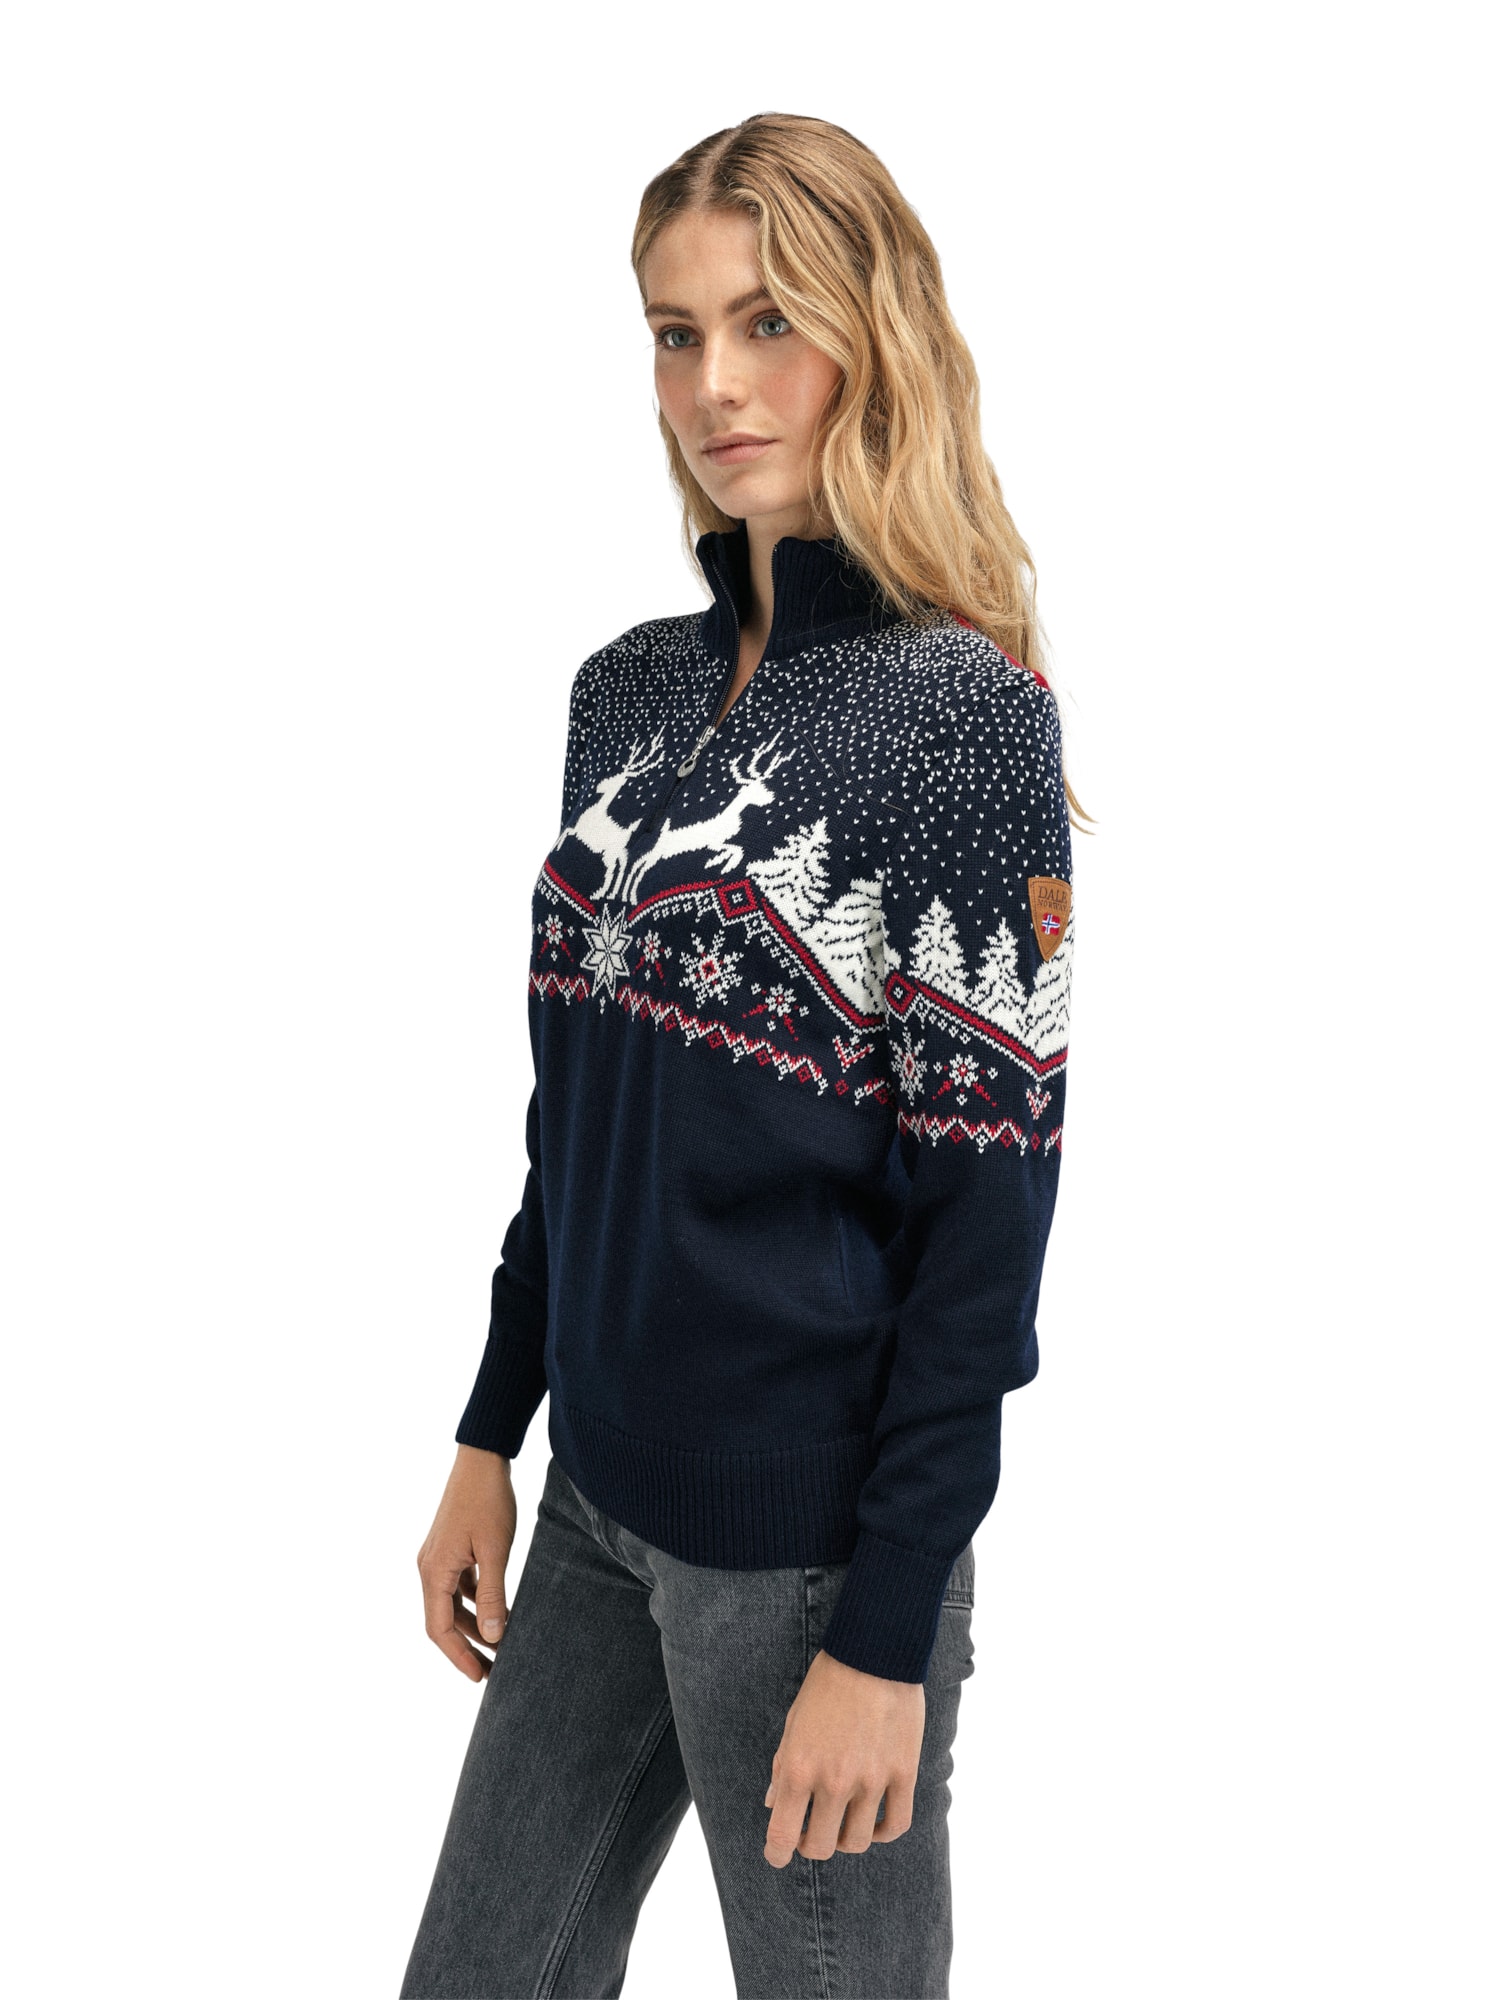 Ladies Jumpers and Legginfs Norwegian Sweater Xmas Gifts for Women